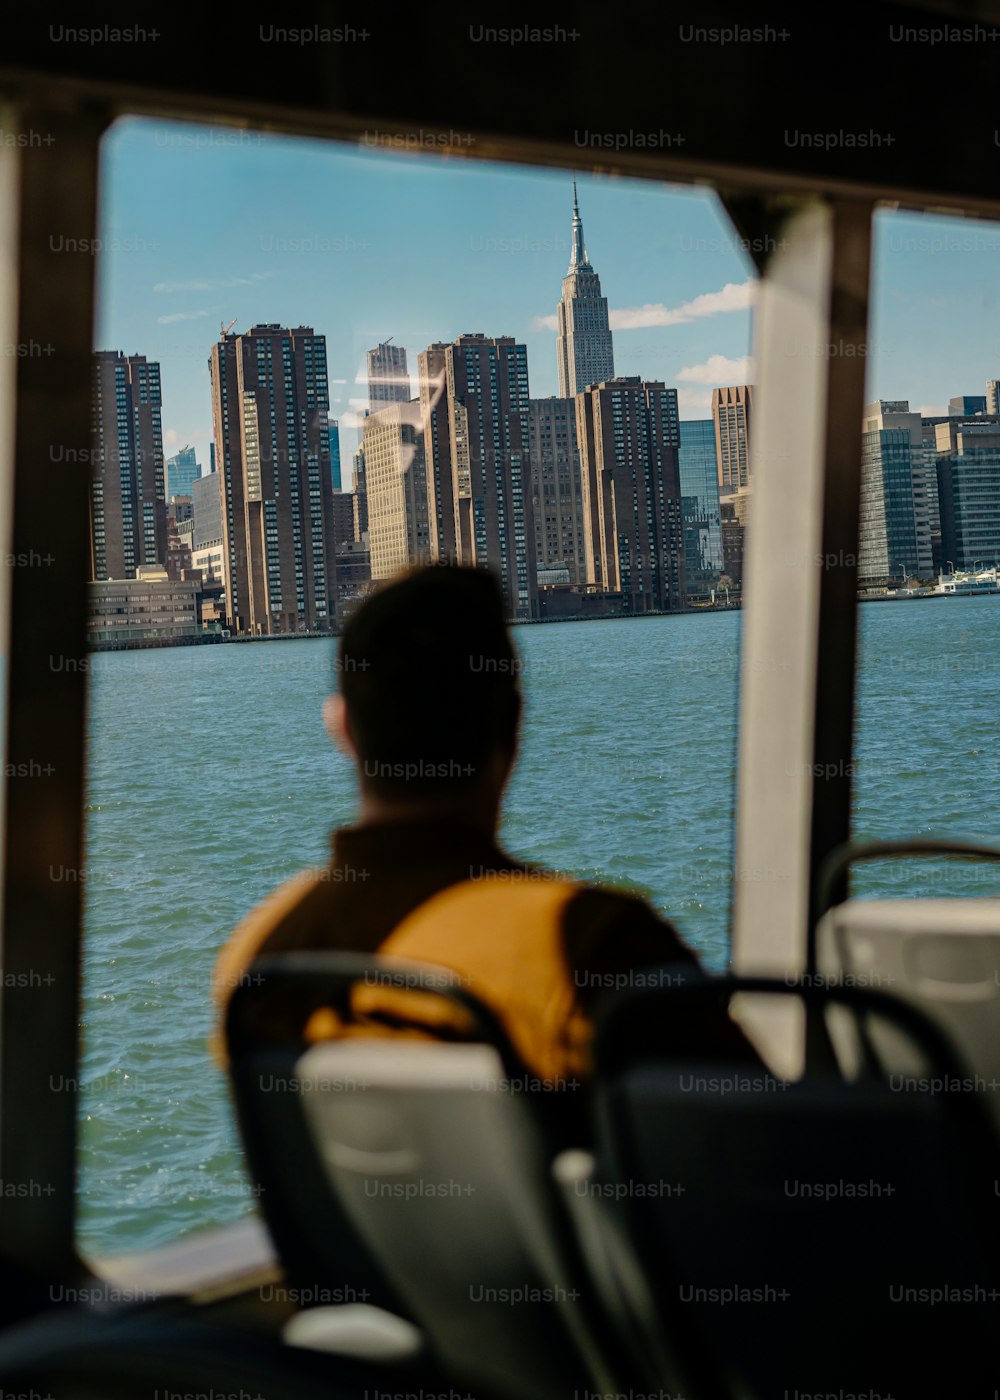 a man sitting on a bus looking out over the water